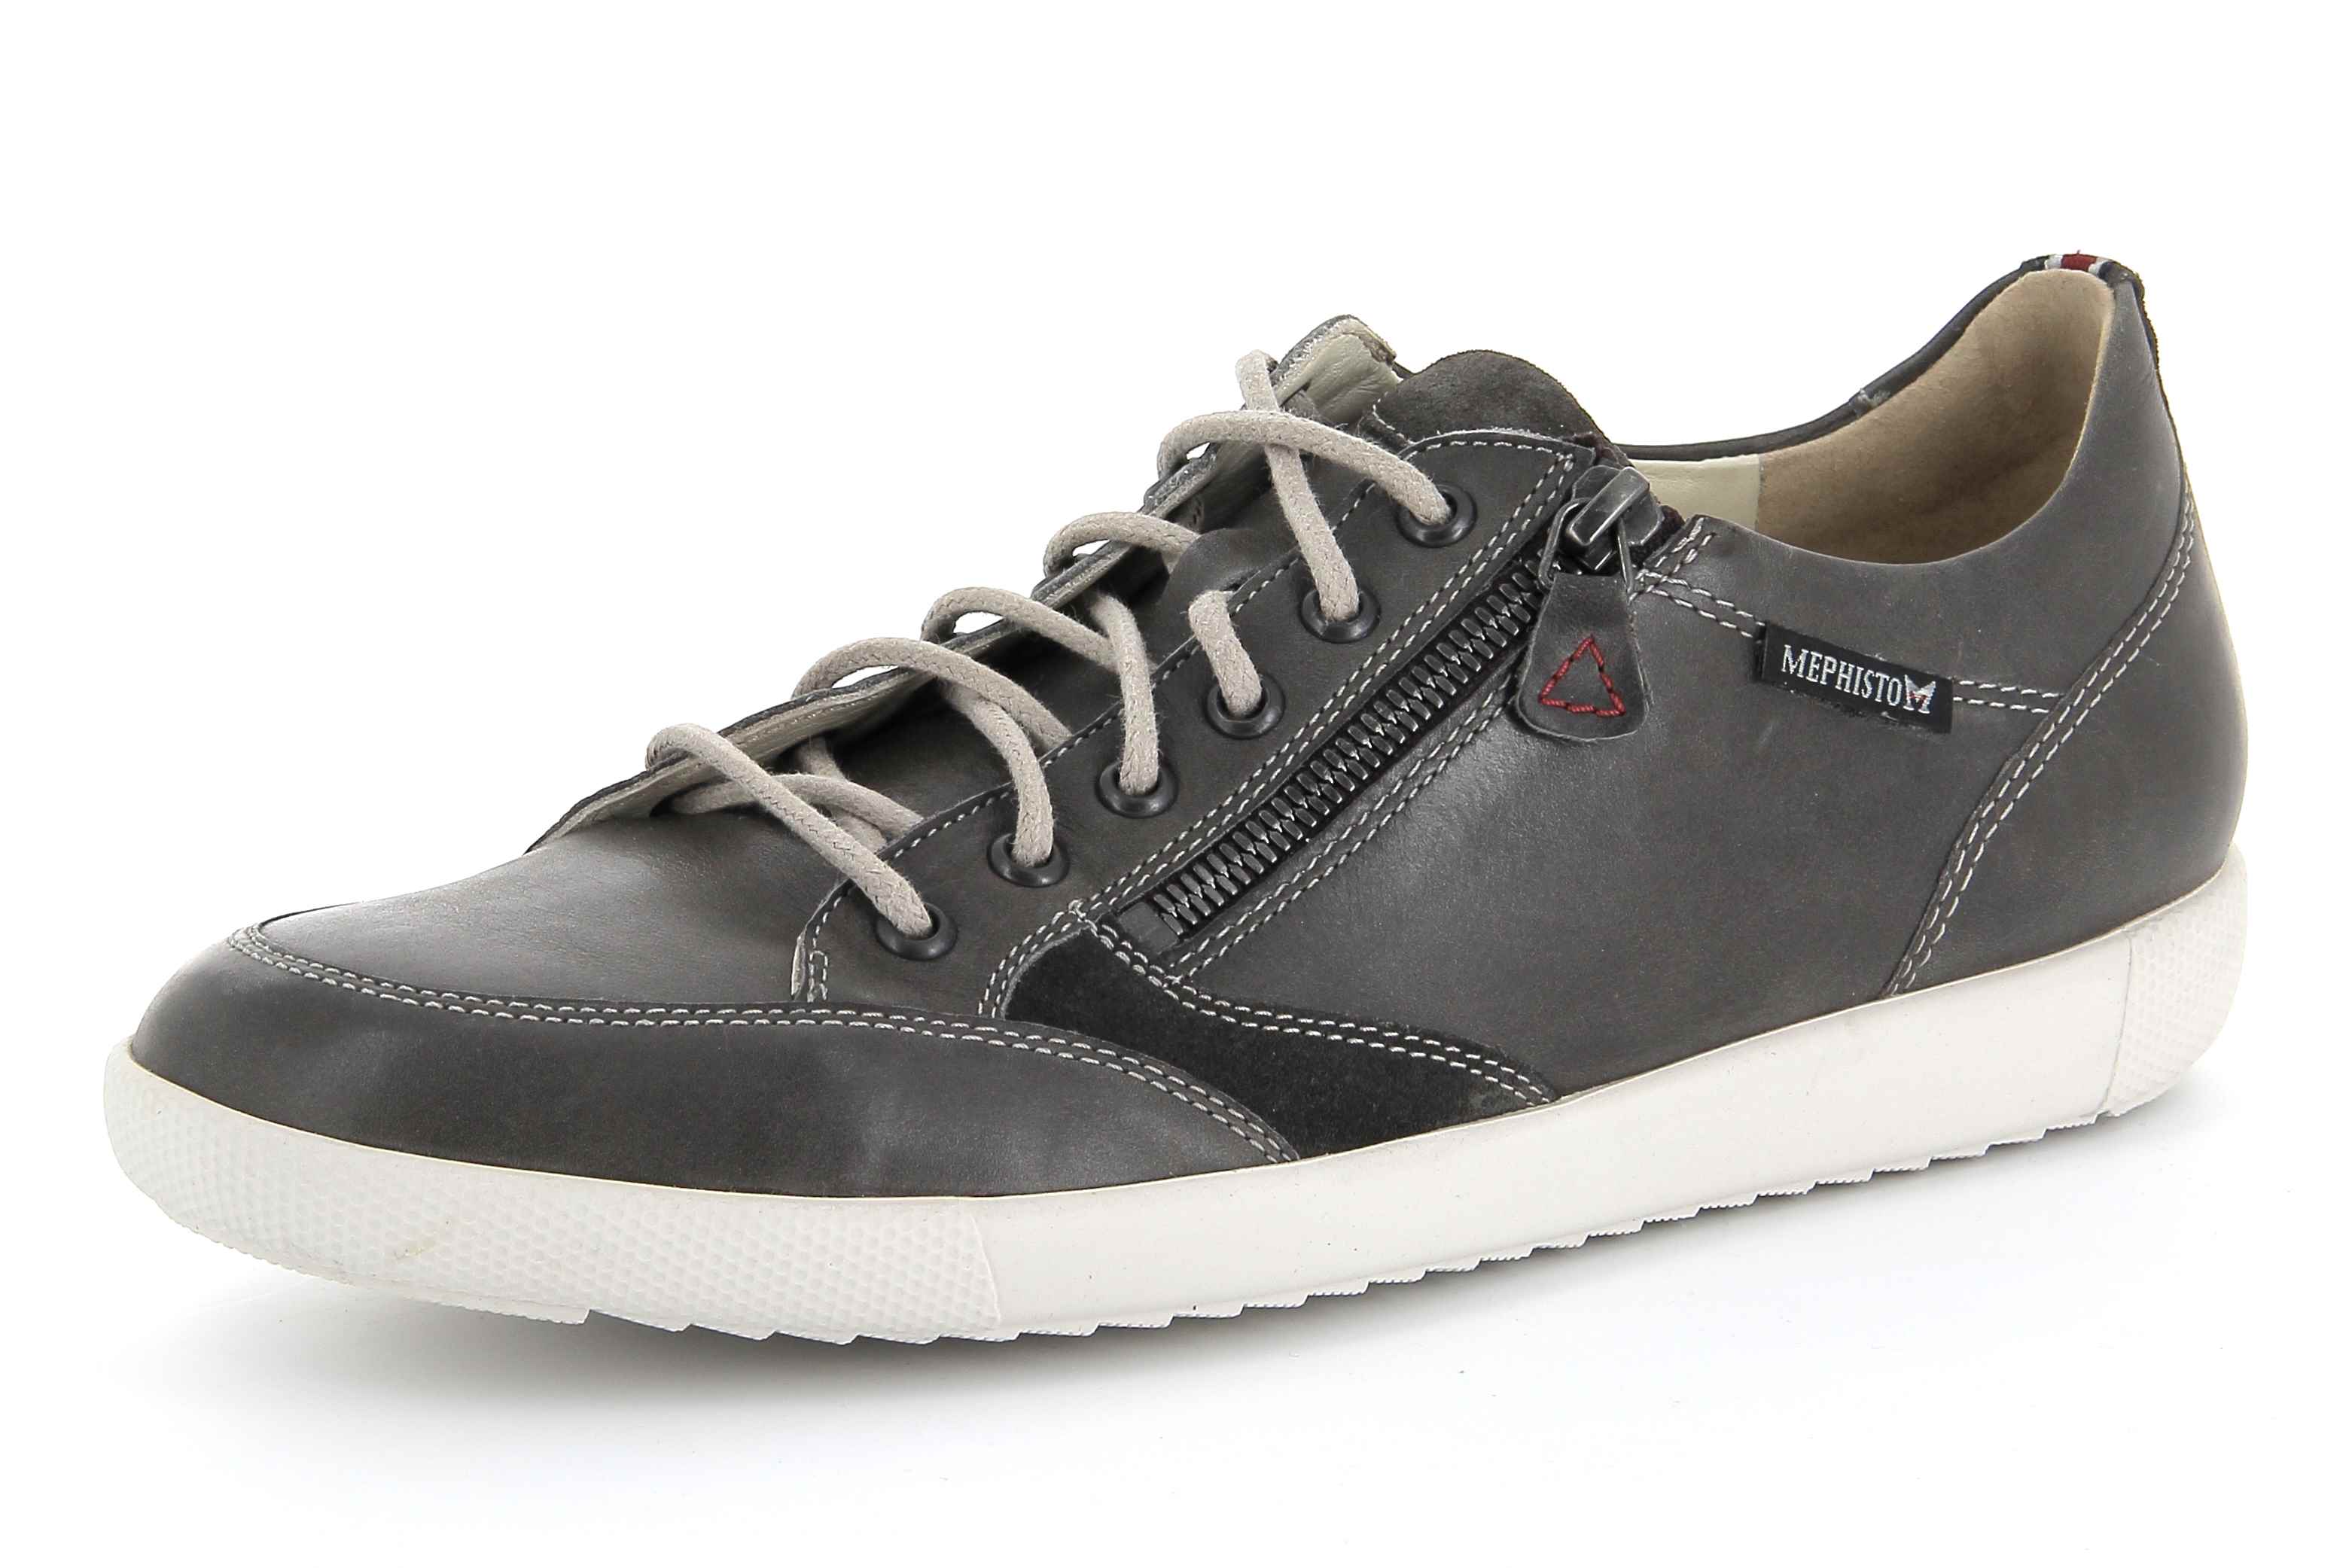 Homme Chaussures Mephisto Homme Chaussures à lacets Mephisto Homme Chaussures à lacets MEPHISTO 41 gris Chaussures à lacets Mephisto Homme 